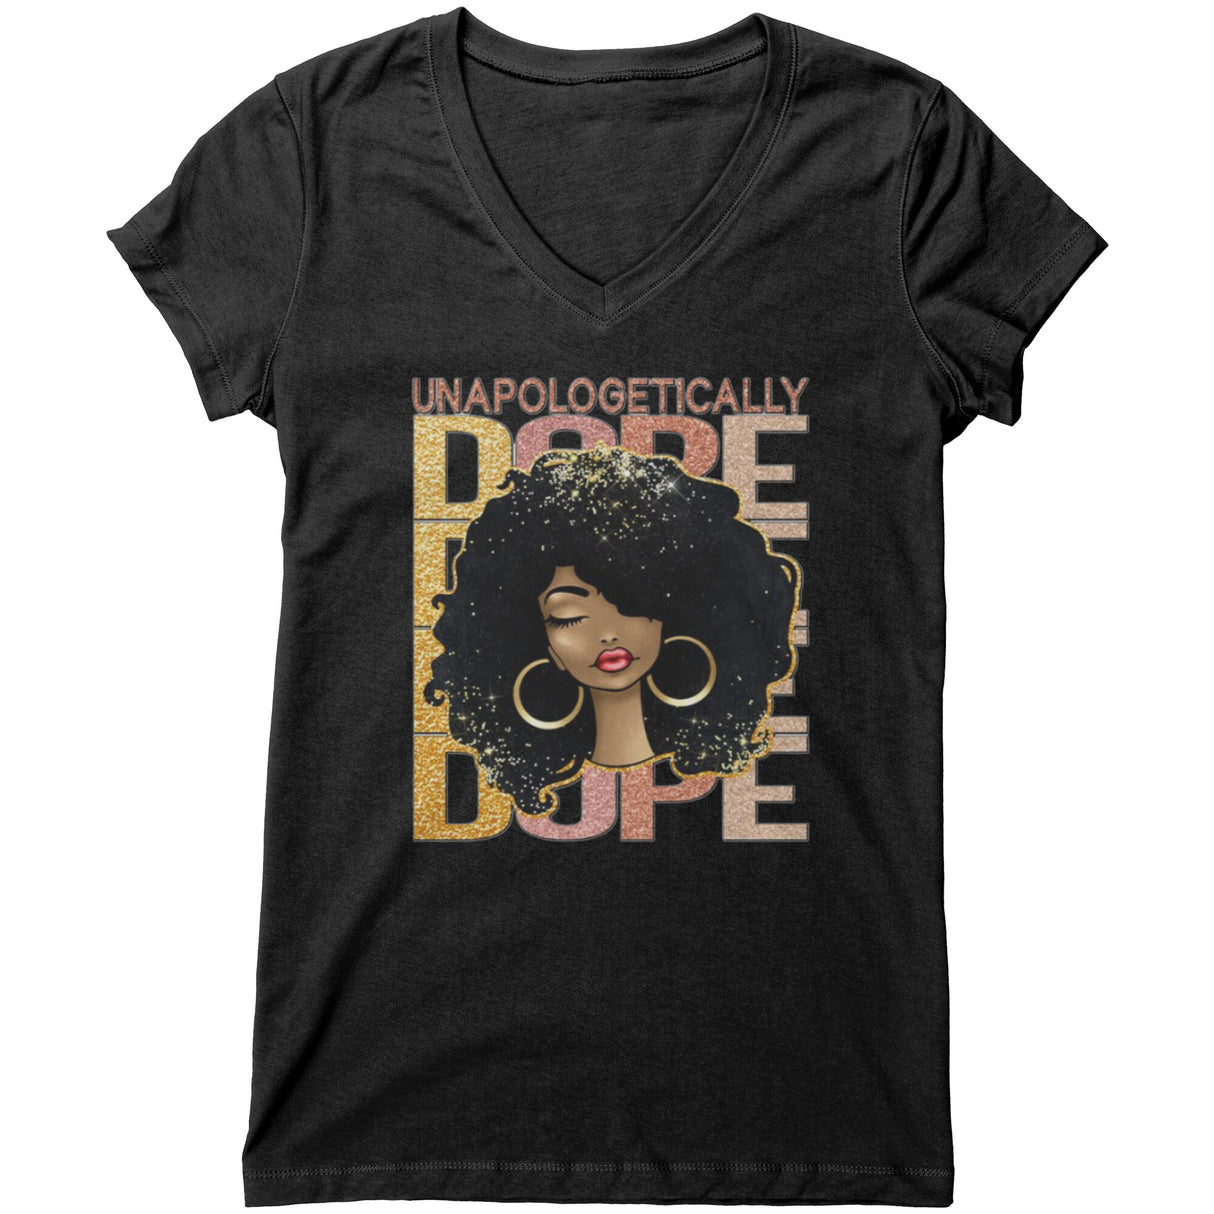 Unapologetically Dope 3 V-neck Shirt